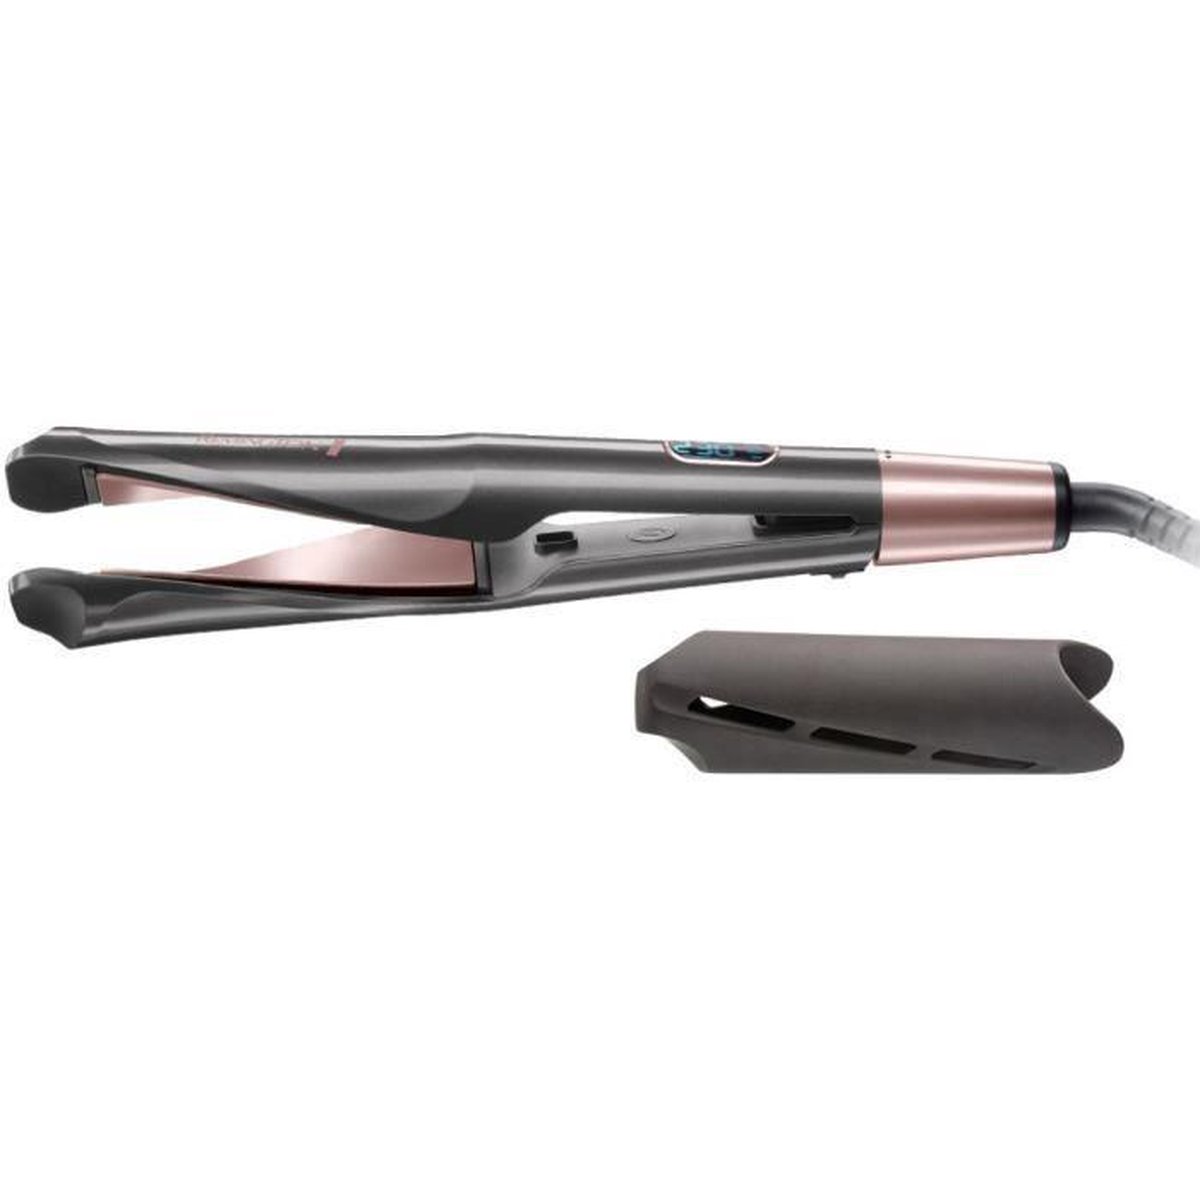 Remington S6606 Straight 2-in-1 Stijltang bol | Curl & Confidence 